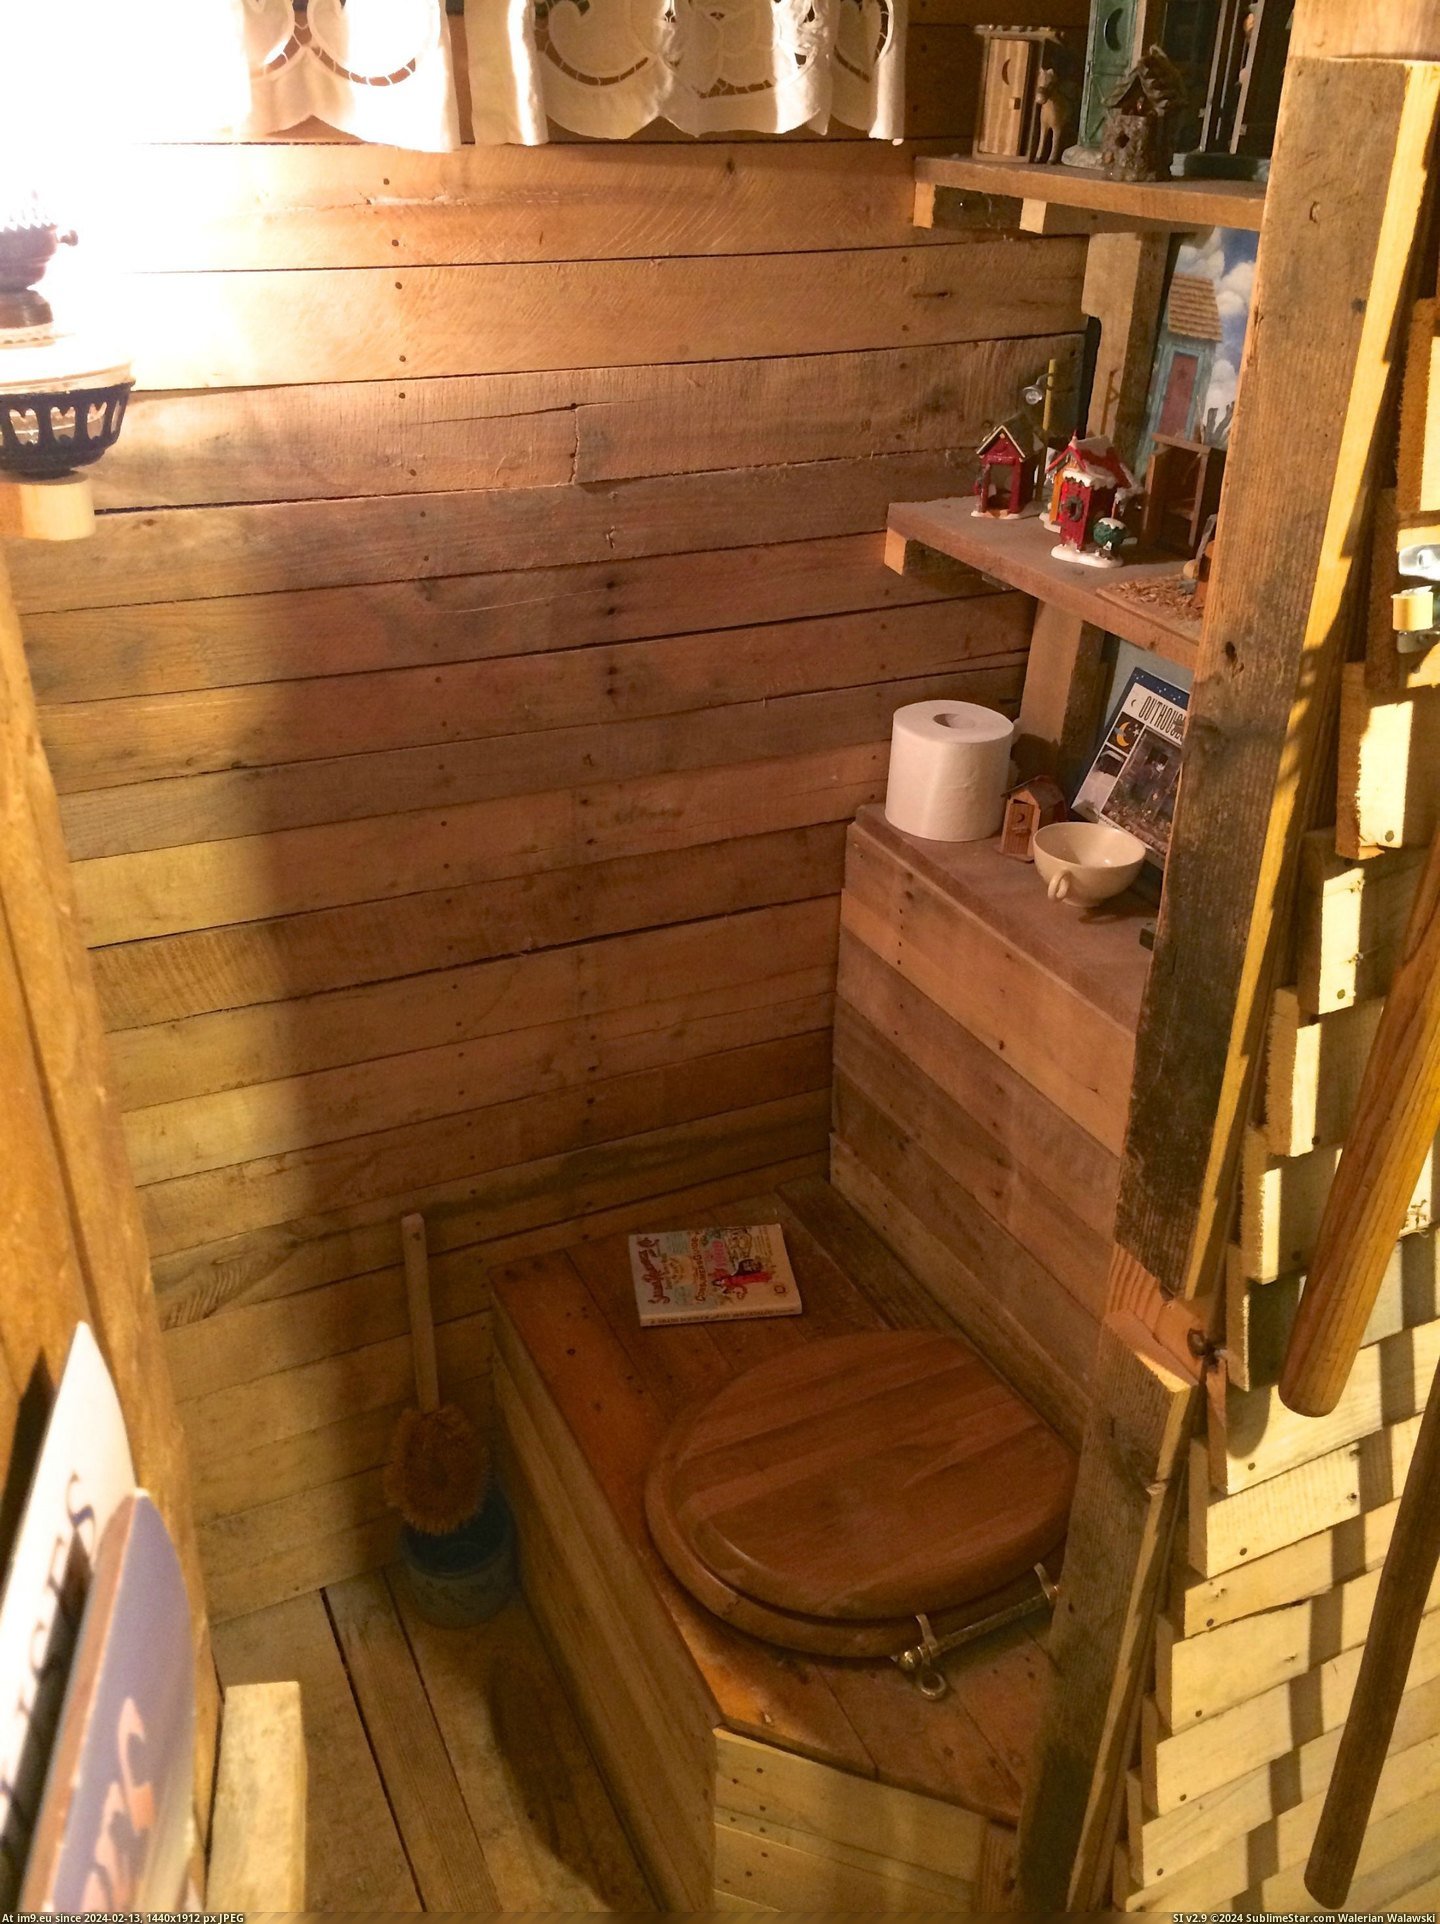 #Guys #Dad #Isn #Basement #Told #Built [Pics] My dad isn't on Reddit, but I told him you guys would appreciate the outhouse he built in their basement. 8 Pic. (Image of album My r/PICS favs))